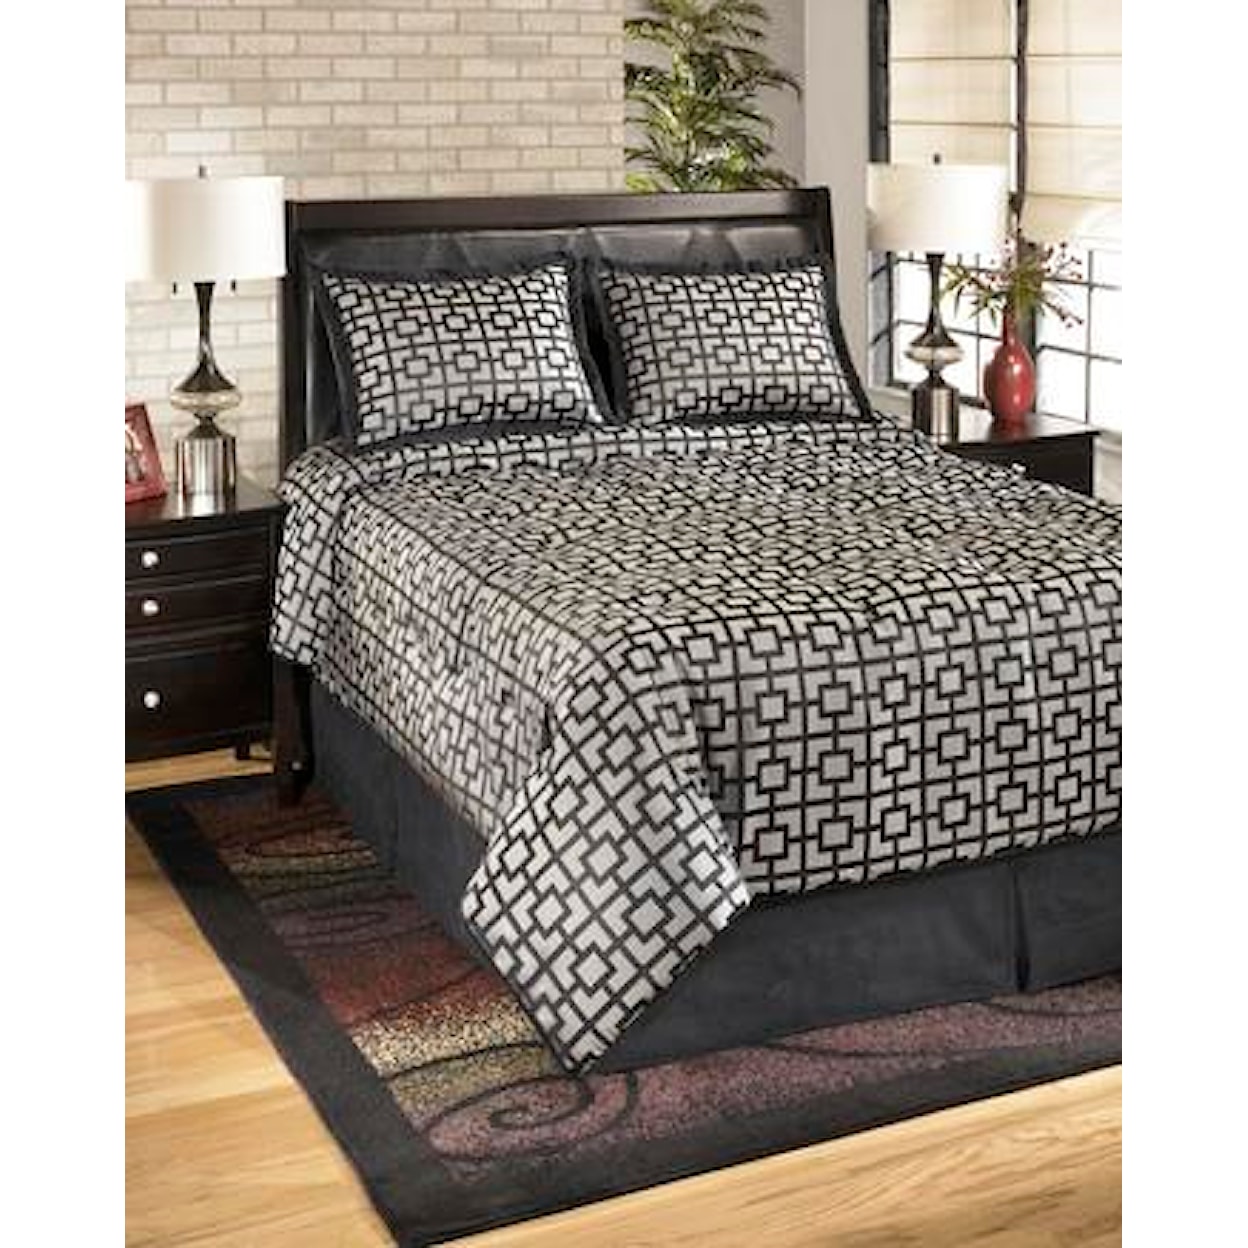 Ashley Furniture Signature Design Bedding Sets Queen Maze Onyx Top of Bed Set